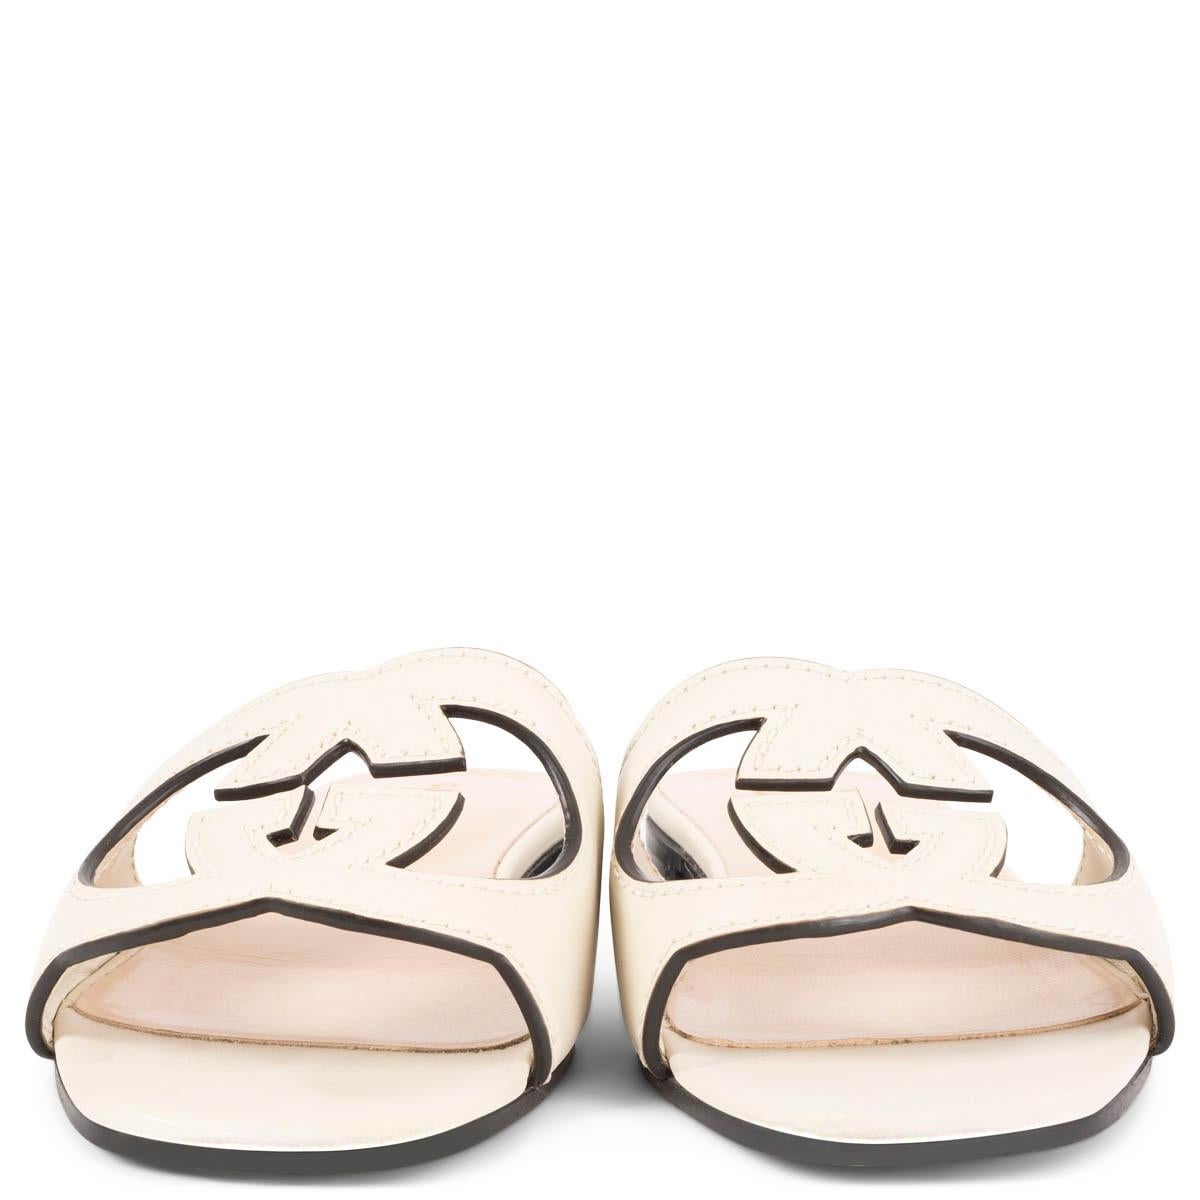 100% authentic Gucci interlocking G cut-out slide sandals in ivory leather. Have been worn and are in excellent condition. 

Measurements
Imprinted Size	35
Shoe Size	35
Inside Sole	22.5cm (8.8in)
Width	7cm (2.7in)
Heel	1.5cm (0.6in)

All our